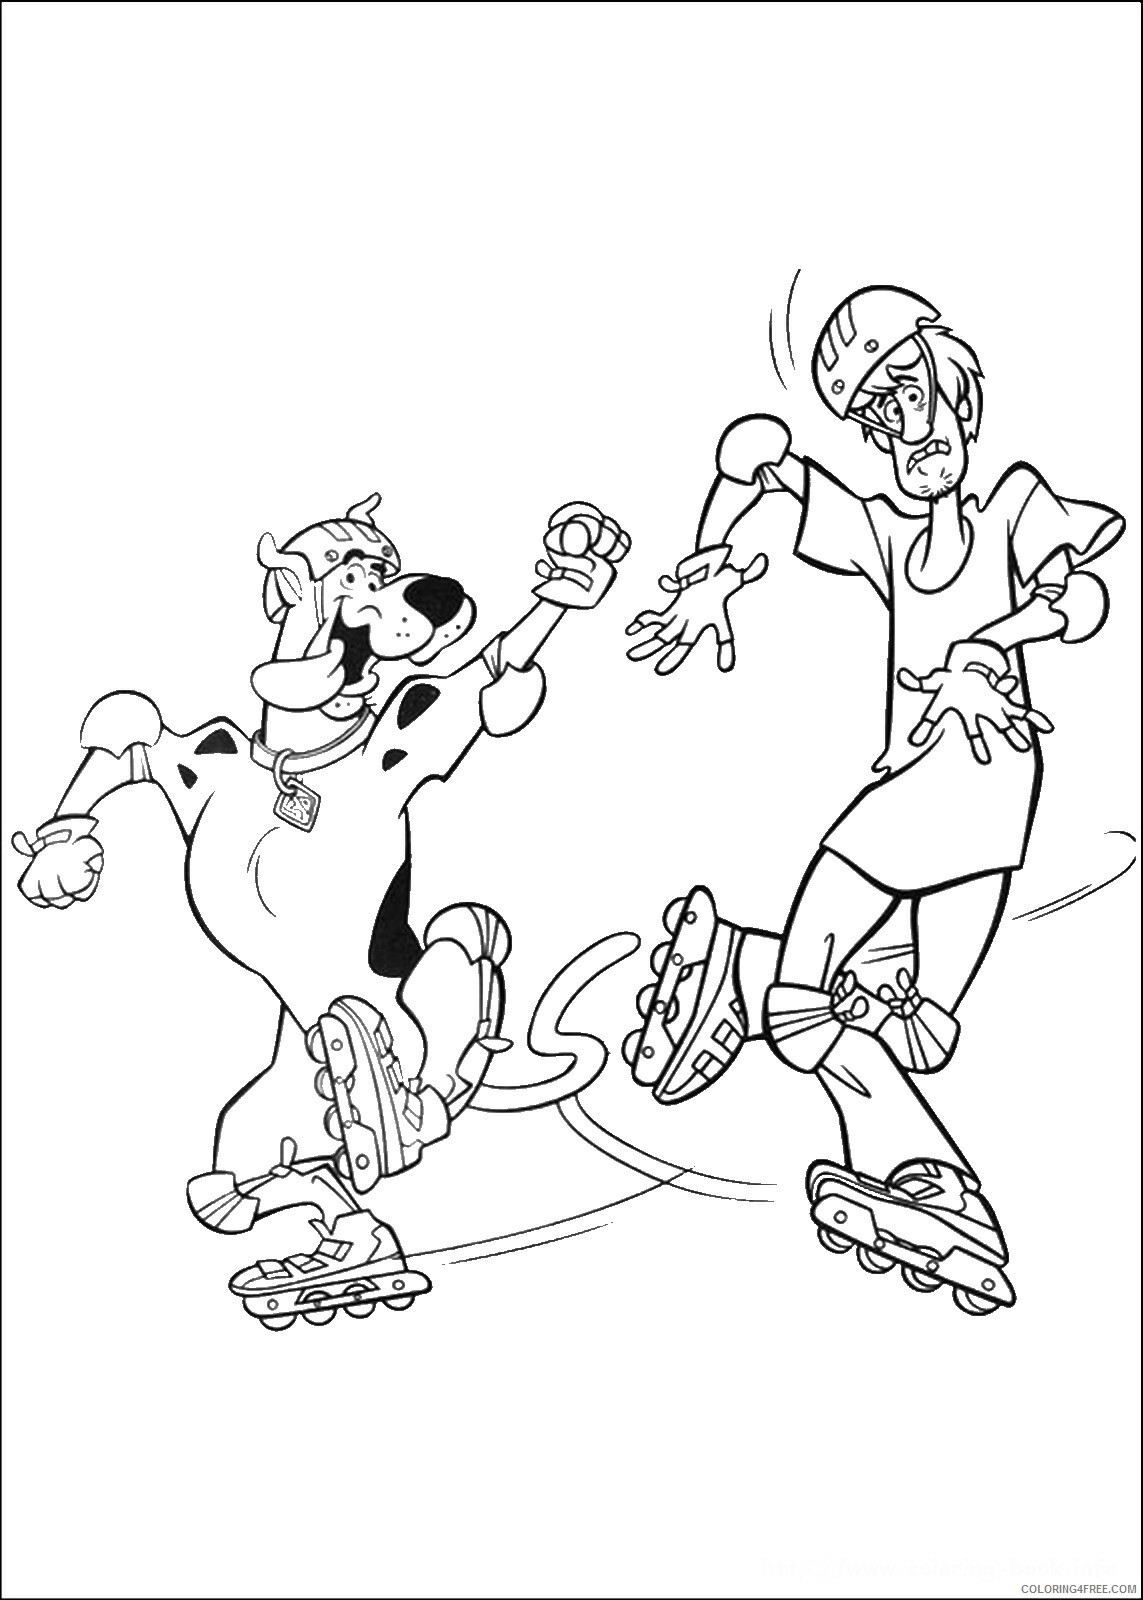 Scooby Doo Coloring Pages TV Film scooby_doo_cl_21 Printable 2020 07269 Coloring4free